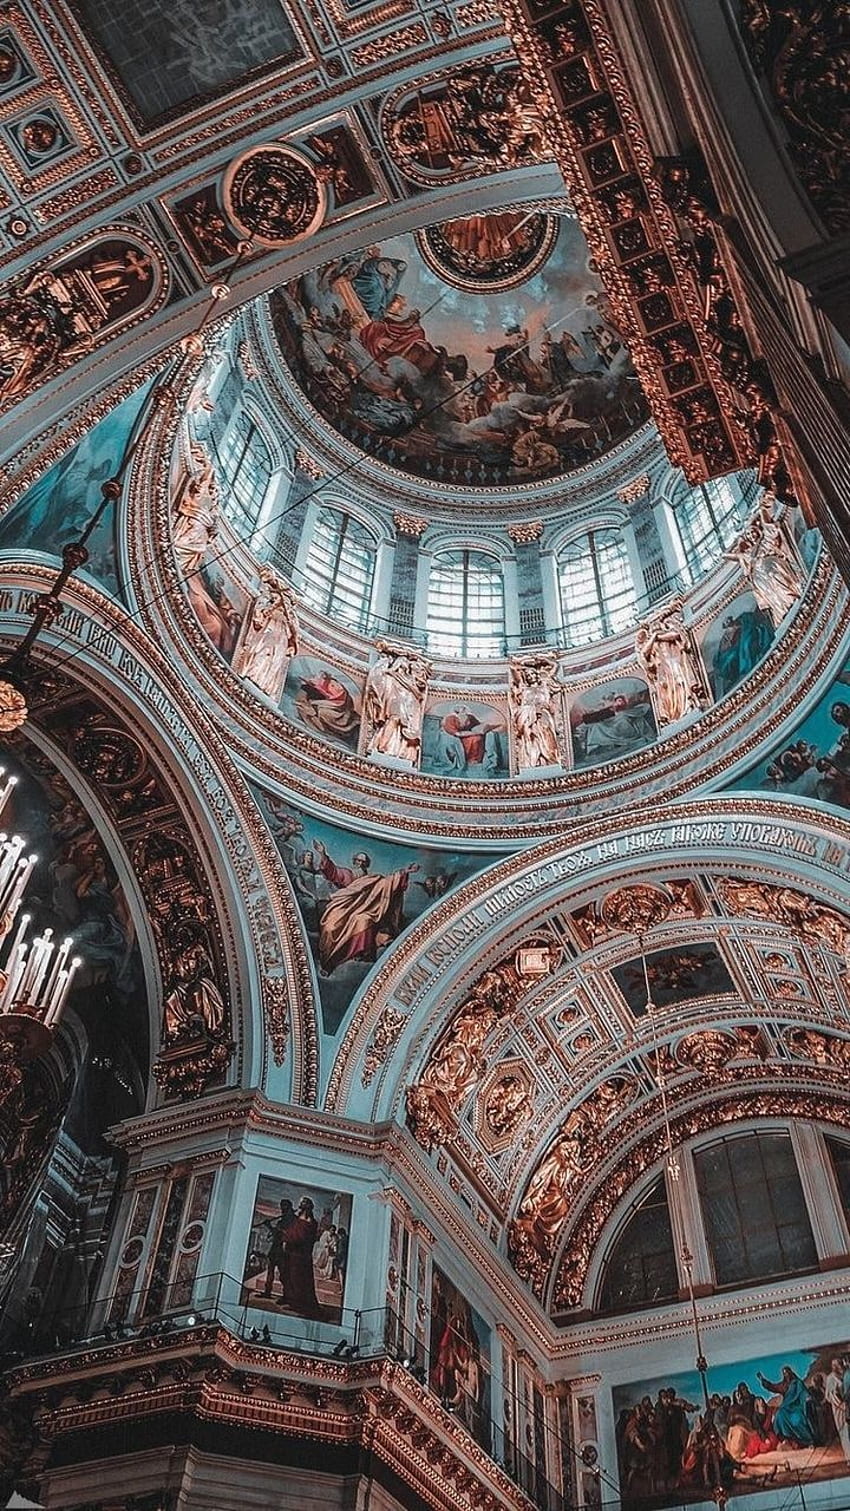 The ceiling of a church with paintings on it - Architecture, light academia, royalcore, Goblincore, castle, dark academia